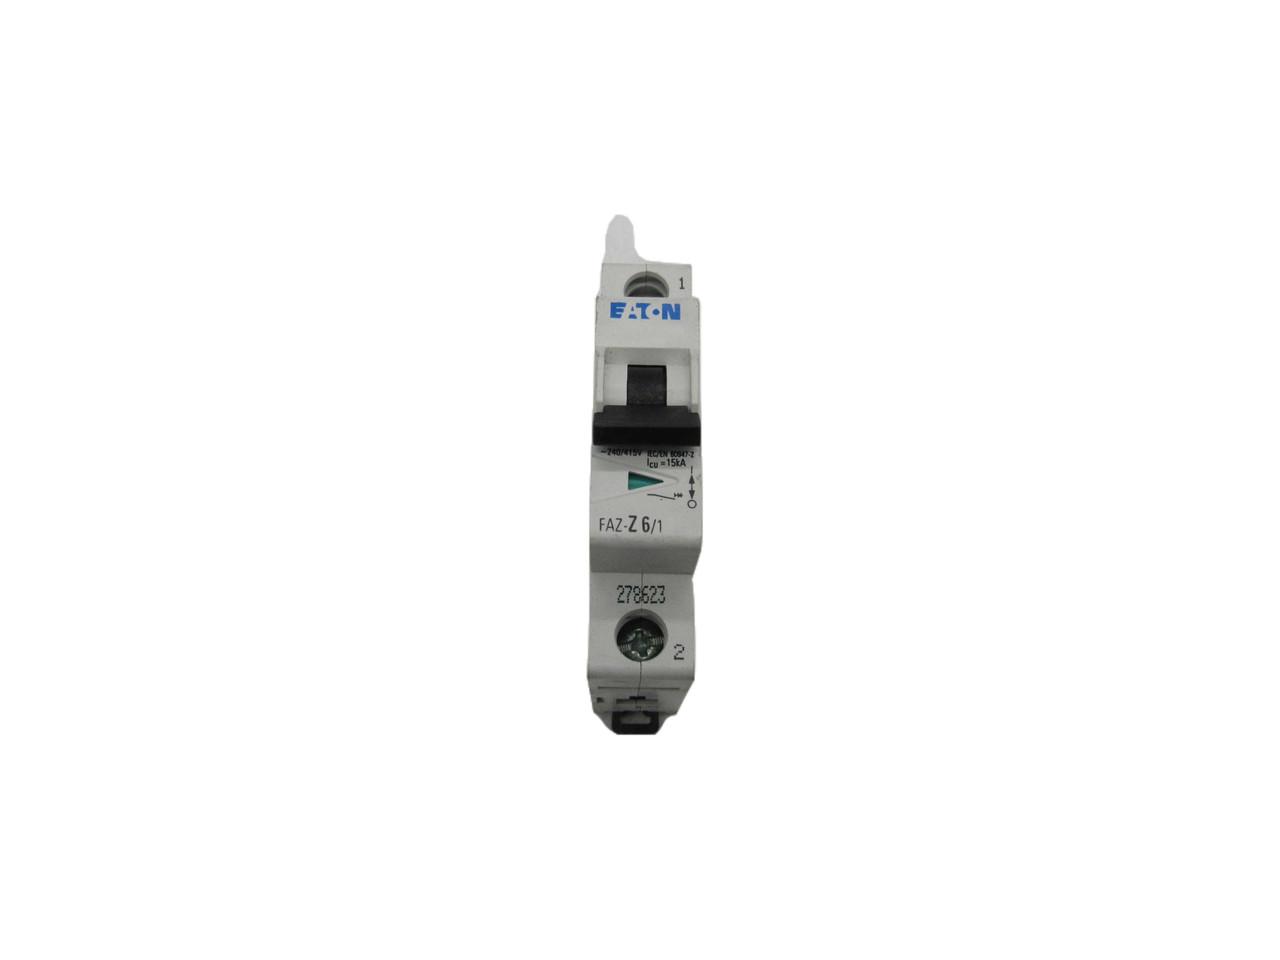 Eaton FAZ-Z6/1 277/480 VAC 50/60 Hz, 6 A, 1-Pole, 10 kA, 2 to 3 x Rated Current, Line/Load Terminal, DIN Rail Mount, Standard Packaging, Z-Curve, Current Limiting, Thermal Magnetic, Supplementary Protector